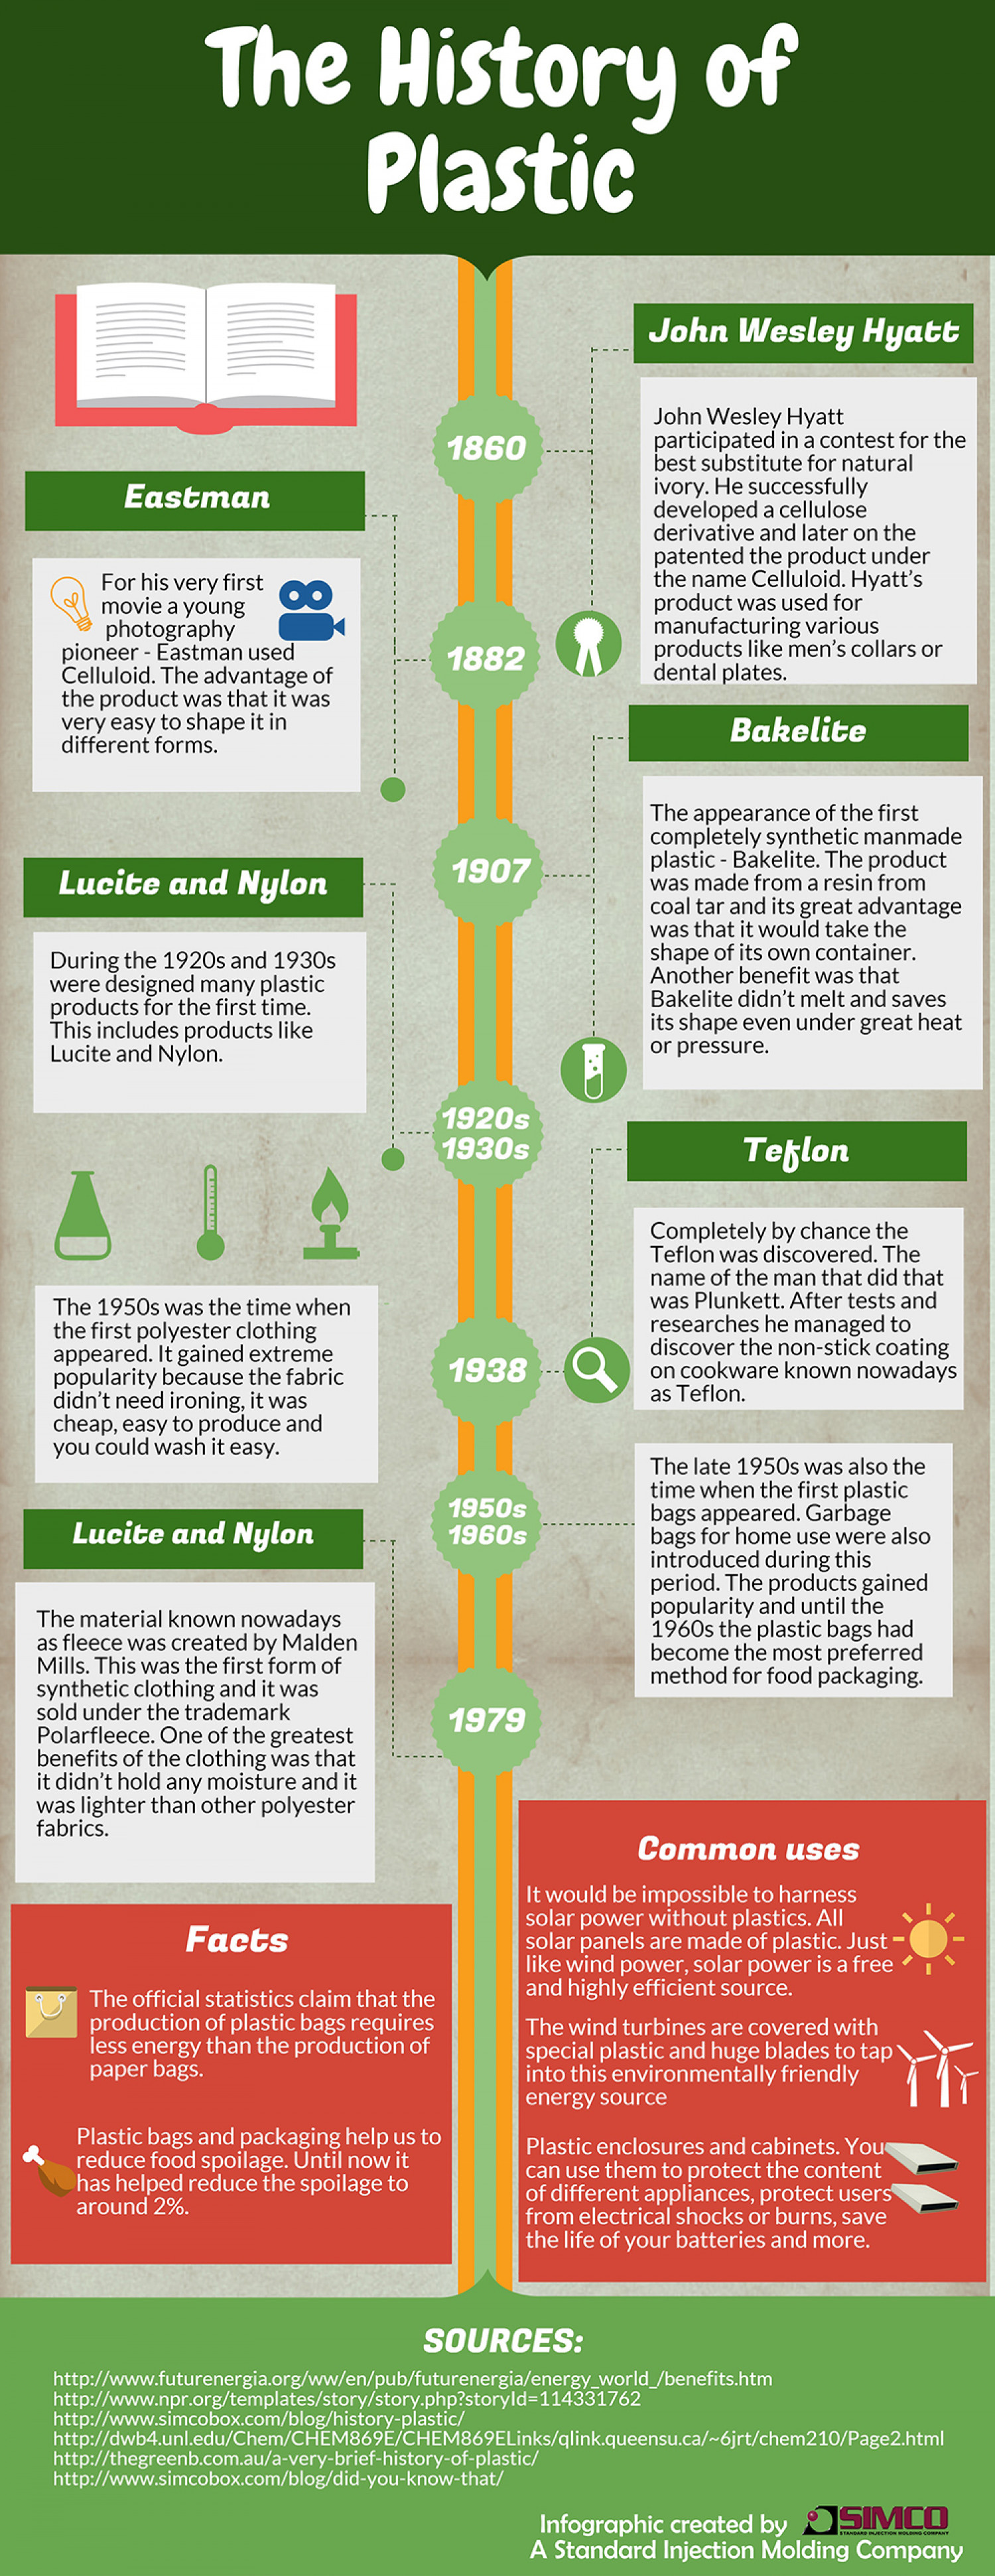 The History of Plastic Infographic